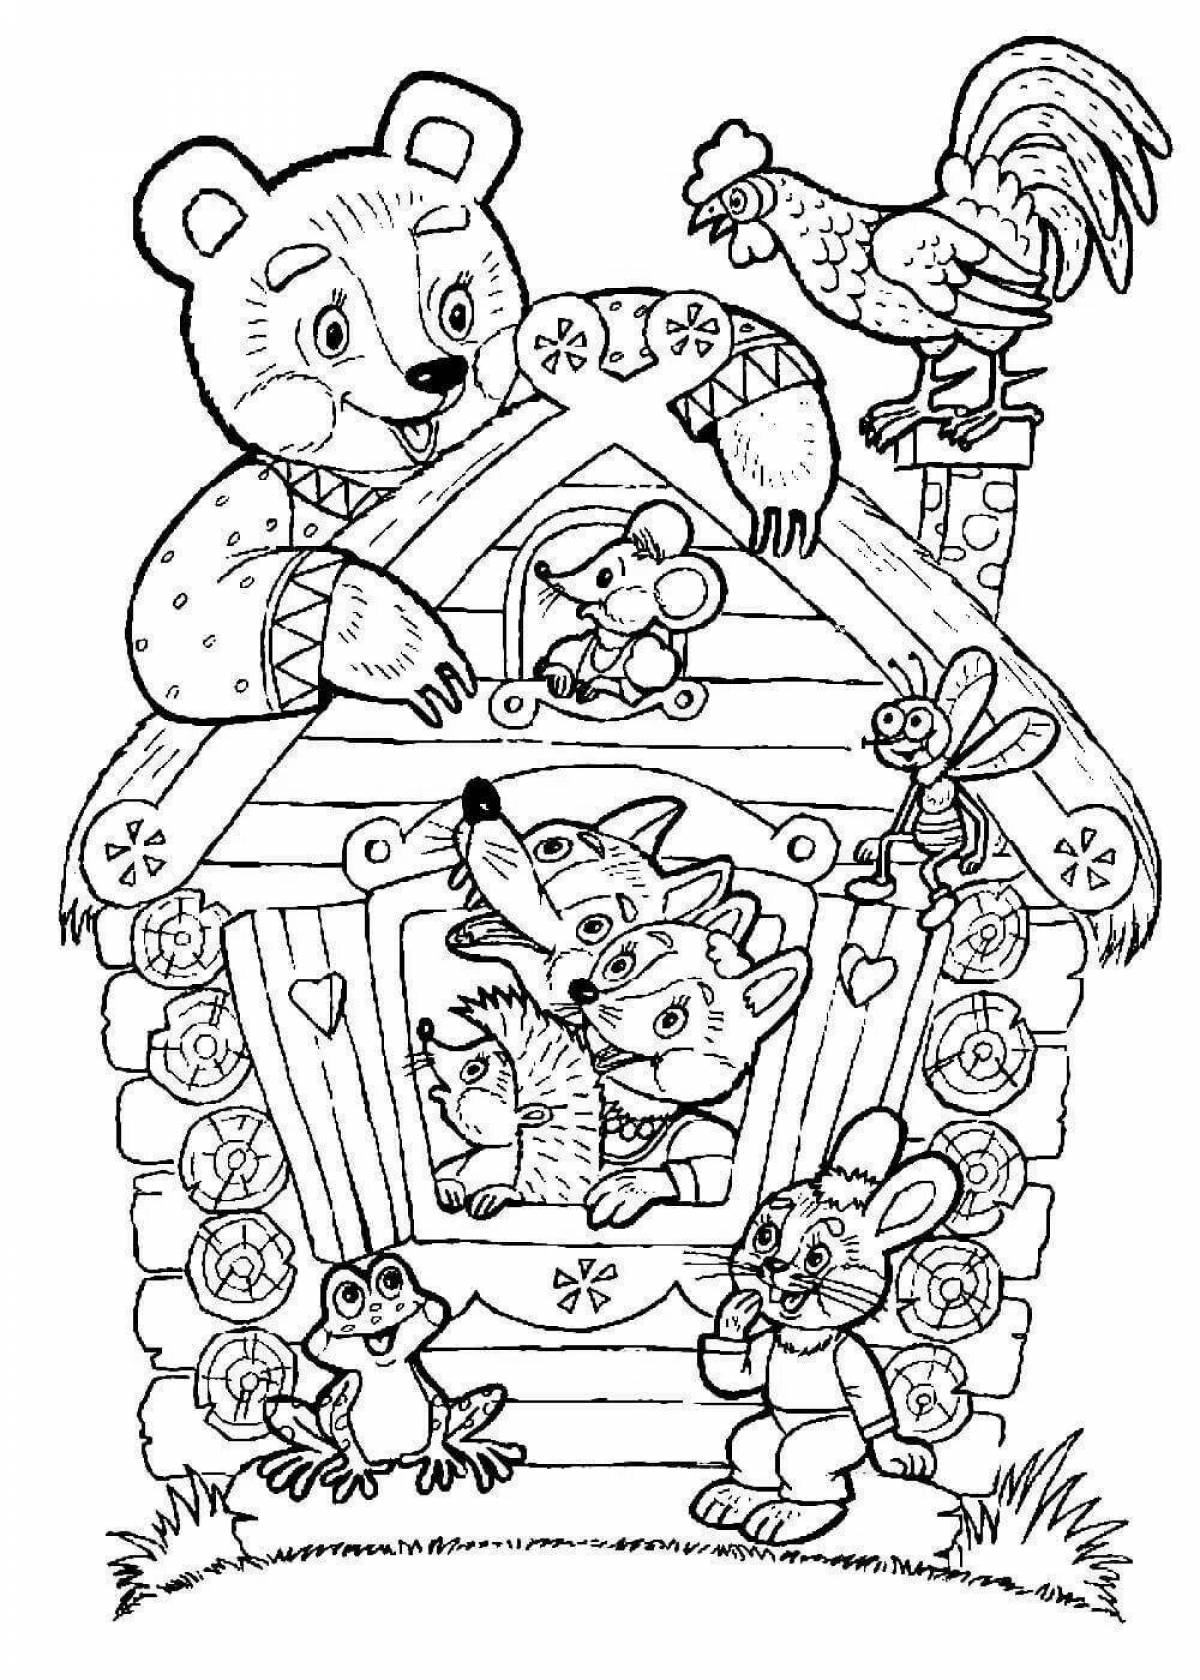 Luxury fairy tale coloring book for preschoolers